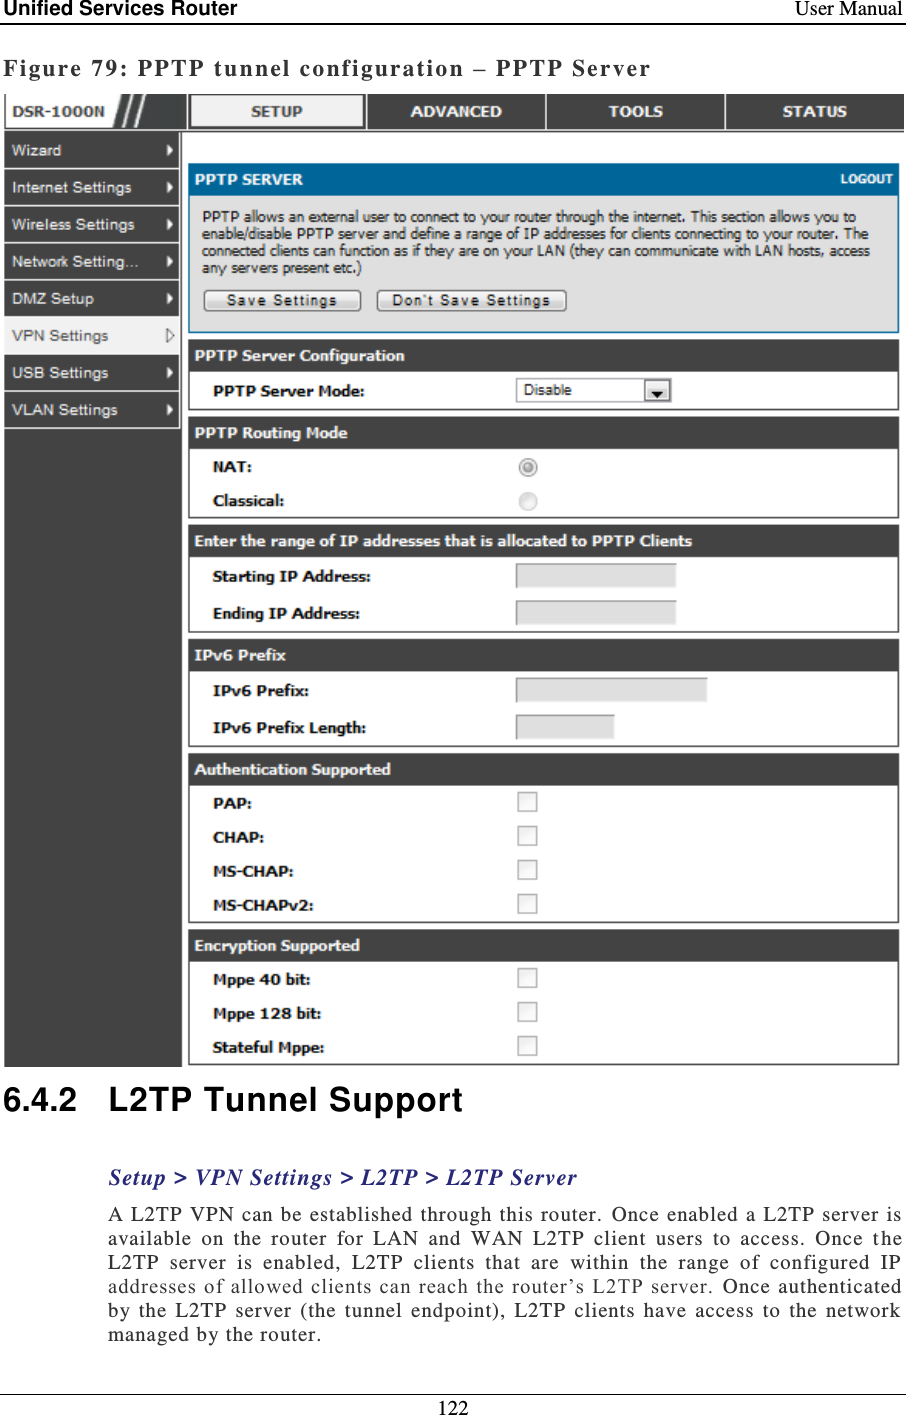 Unified Services Router    User Manual 122  Figure 79: PPTP  tunnel co nf iguration –  PPTP Server   6.4.2  L2TP Tunnel Support Setup &gt; VPN Settings &gt; L2TP &gt; L2TP Server A  L2TP VPN can be  established  through this  router.  Once  enabled  a L2TP server  is available  on  the  router  for  LAN  and  WAN  L2TP  client  users  to  access.  Once  t he L2TP  server  is  enabled,  L2TP  clients  that  are  within  the  range  of  configured  IP addresses of allowed clients can  reach  the router’s  L2TP  server.  Once  authenticated by  the  L2TP  server  (the  tunnel  endpoint),  L2TP  clients  have  access  to  the  network managed by the router.  